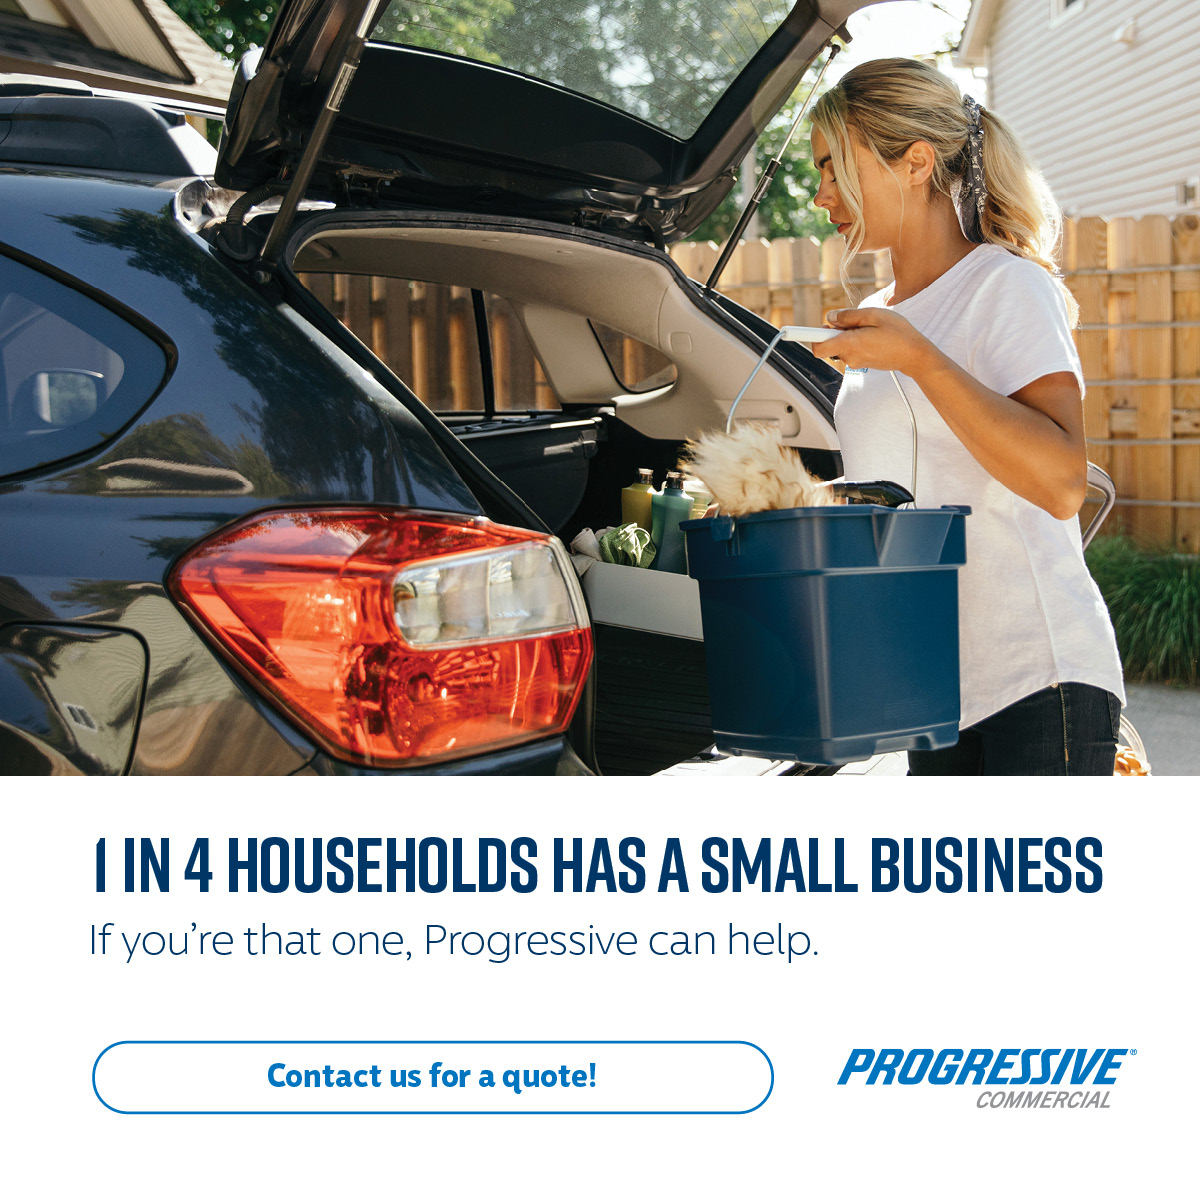 If you or a friend own a small business, we’re here for you! Ask us about Progressive Commercial insurance today. #pgragent, #smallbusiness, #needcommercialauto, #CommercialAuto